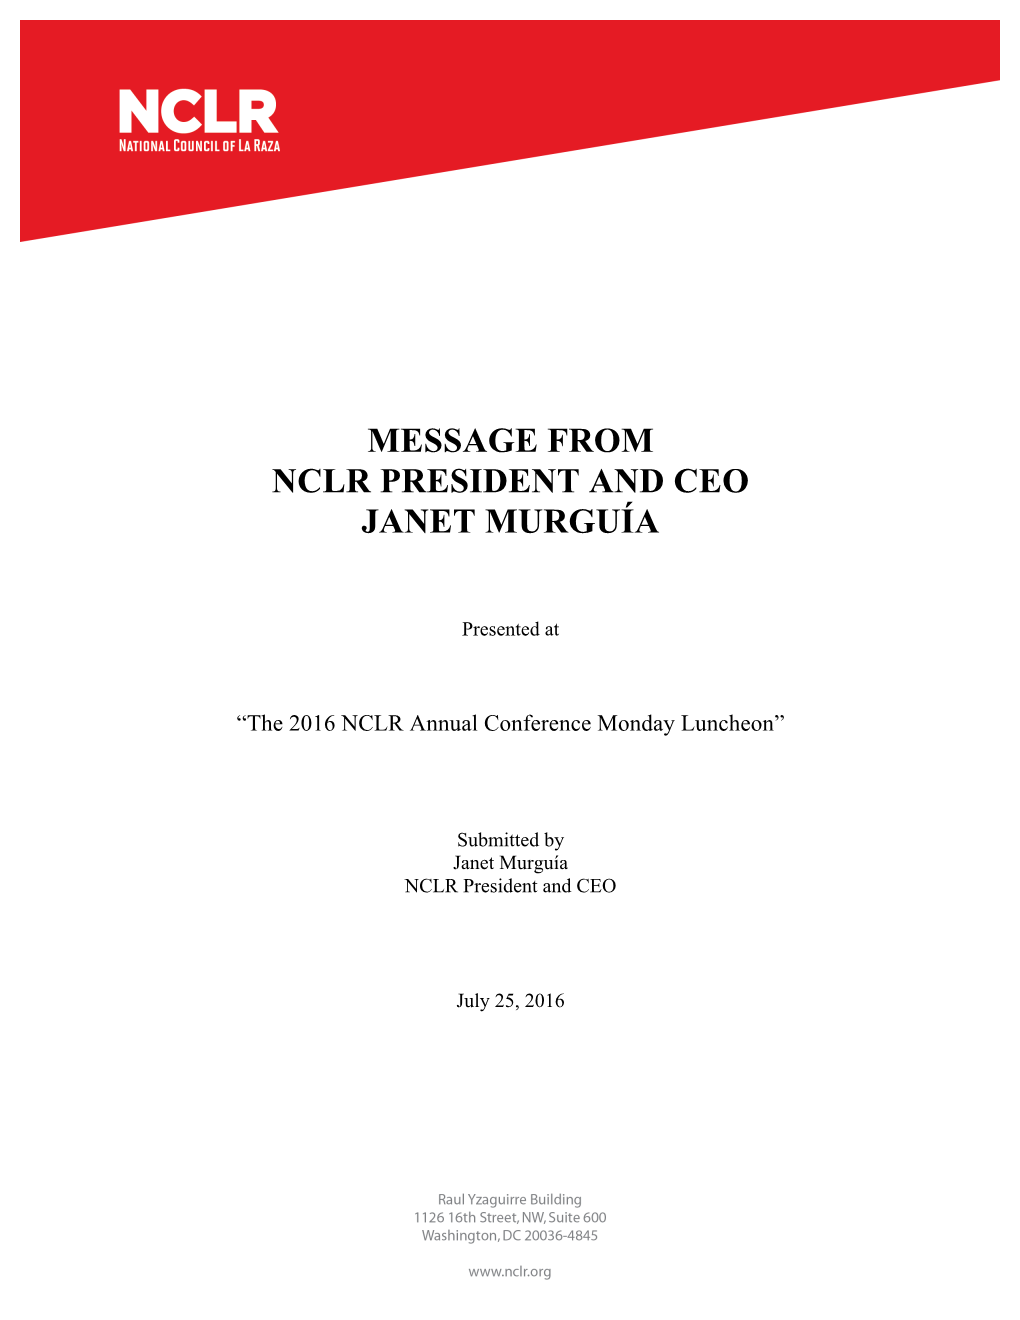 Message from Nclr President and Ceo Janet Murguía